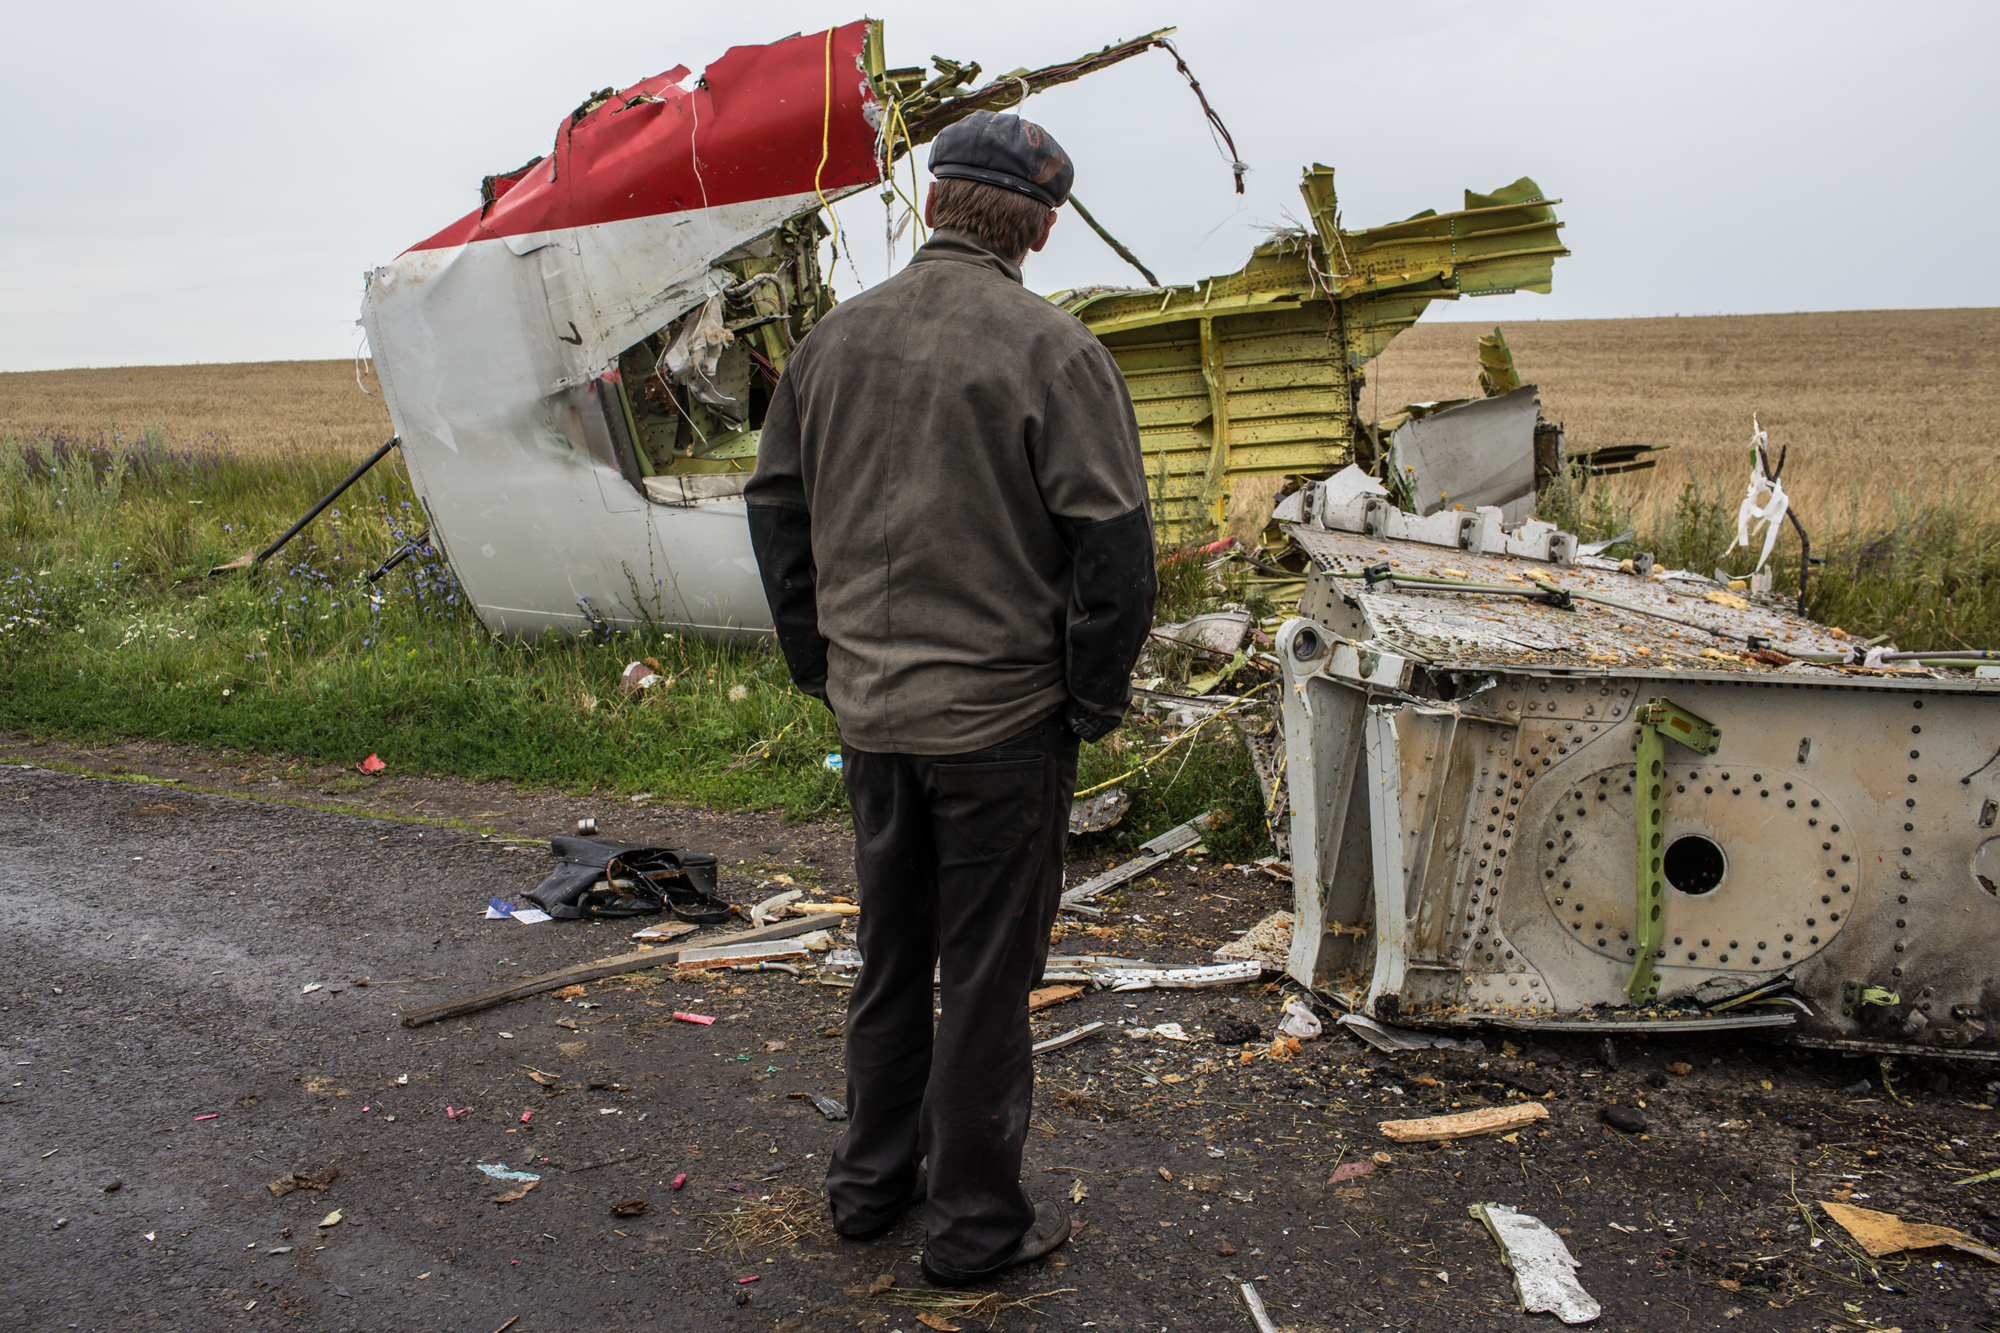 A man looks at the wreckage of passenger plane Malaysia Airlines flight MH17 on July 18, 2014 in Grabovka, Ukraine.